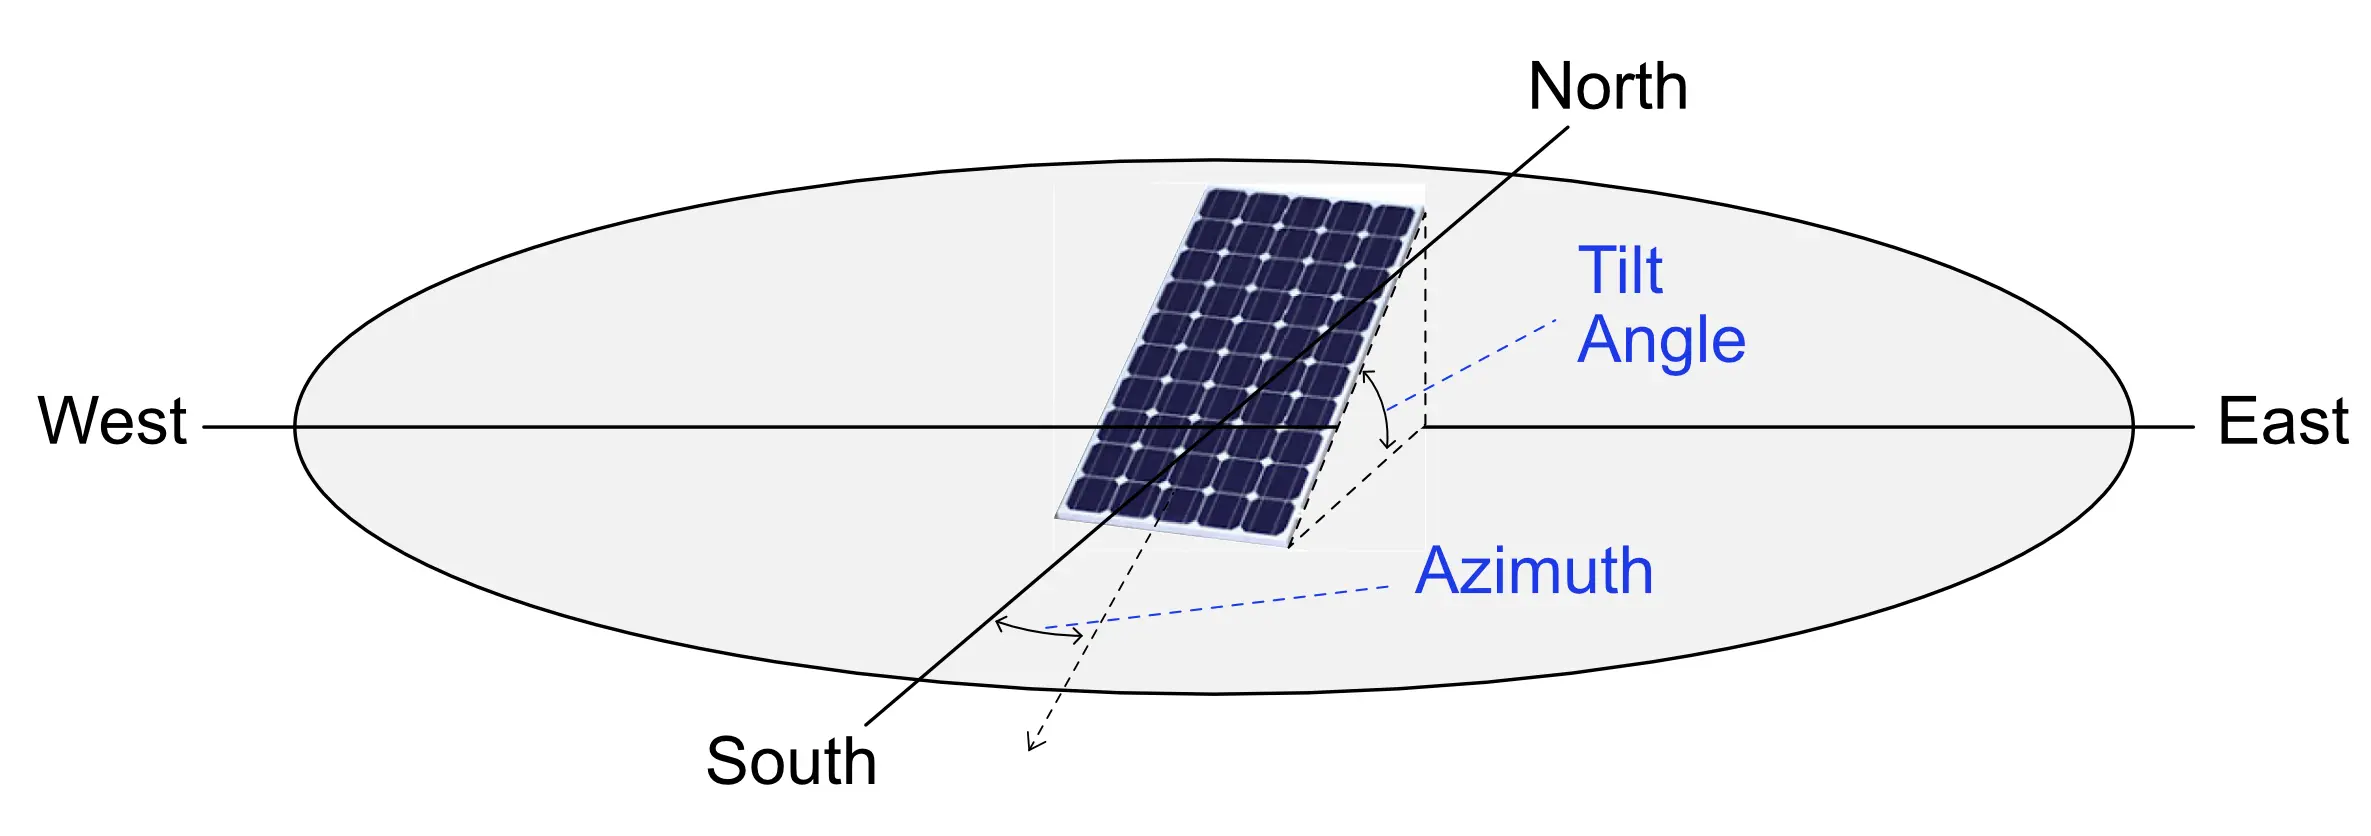 azimuth angle for solar panels - What is the solar azimuth angle